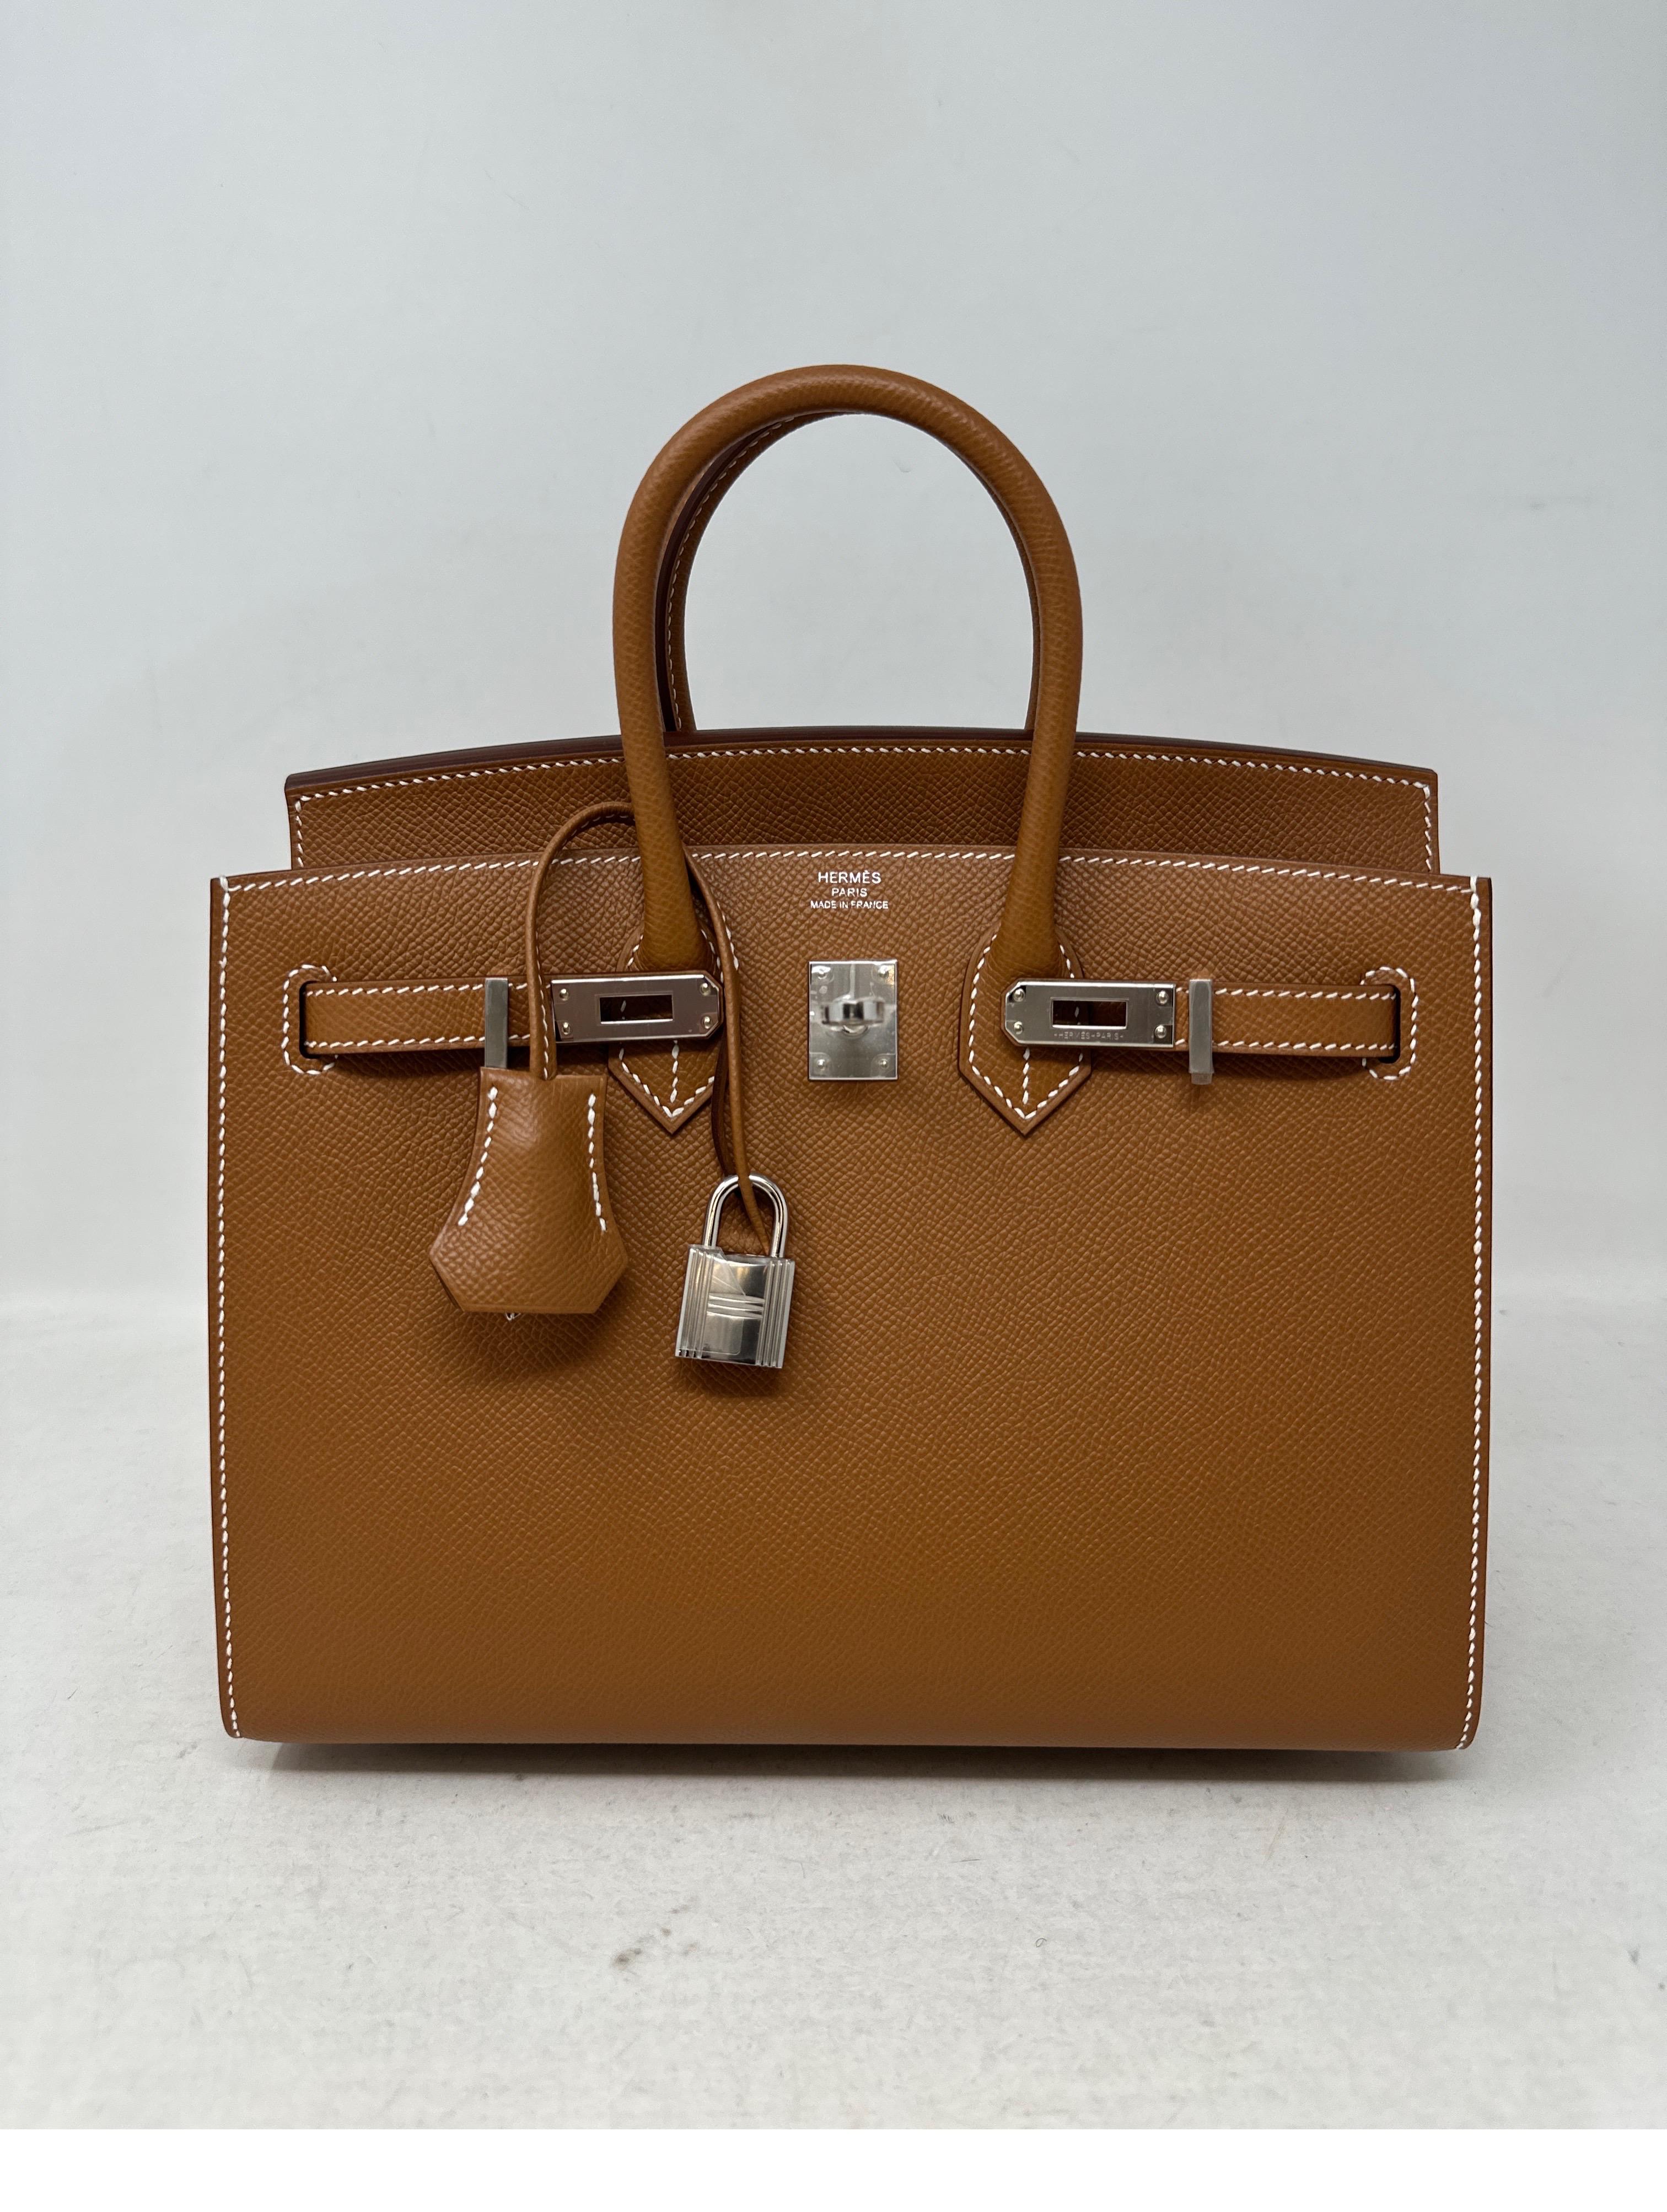 Hermes 25 Birkin Gold Sellier Bag. Palladium hardware. Excellent brand new bag. Plastic is on the hardware. Rare size 25 mini Birkin. Hard to get sellier. Beautiful gold tan color with white stitching. Great investment bag. Full set. Includes